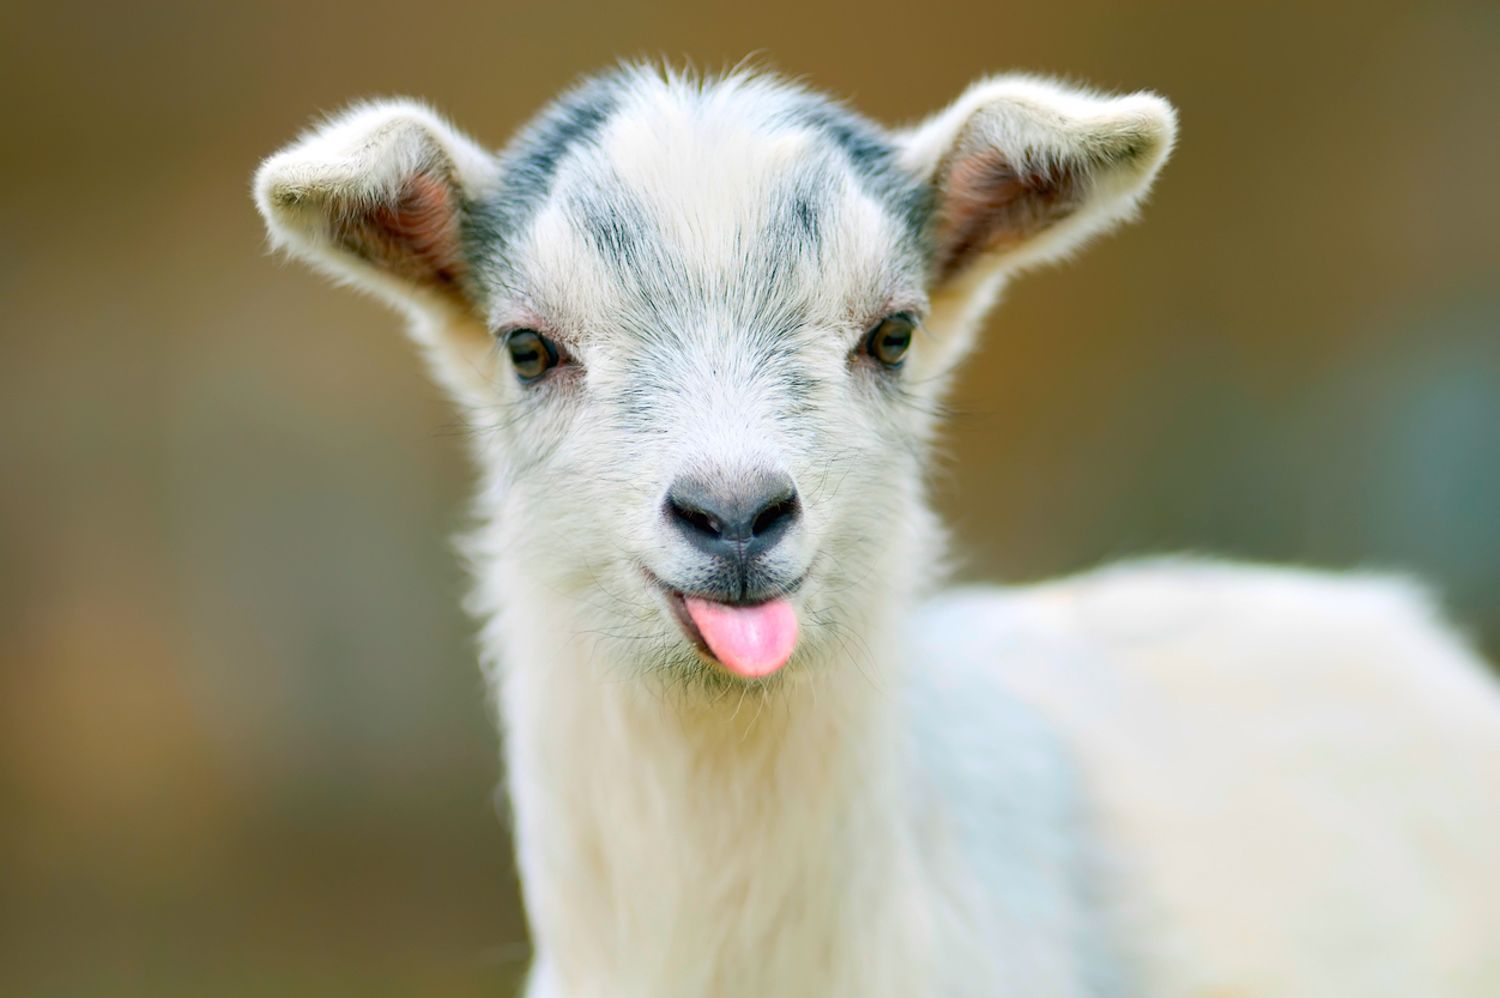 So You’re a Trivia Expert? Prove It by Answering All 22 of These True/False Questions Correctly goats